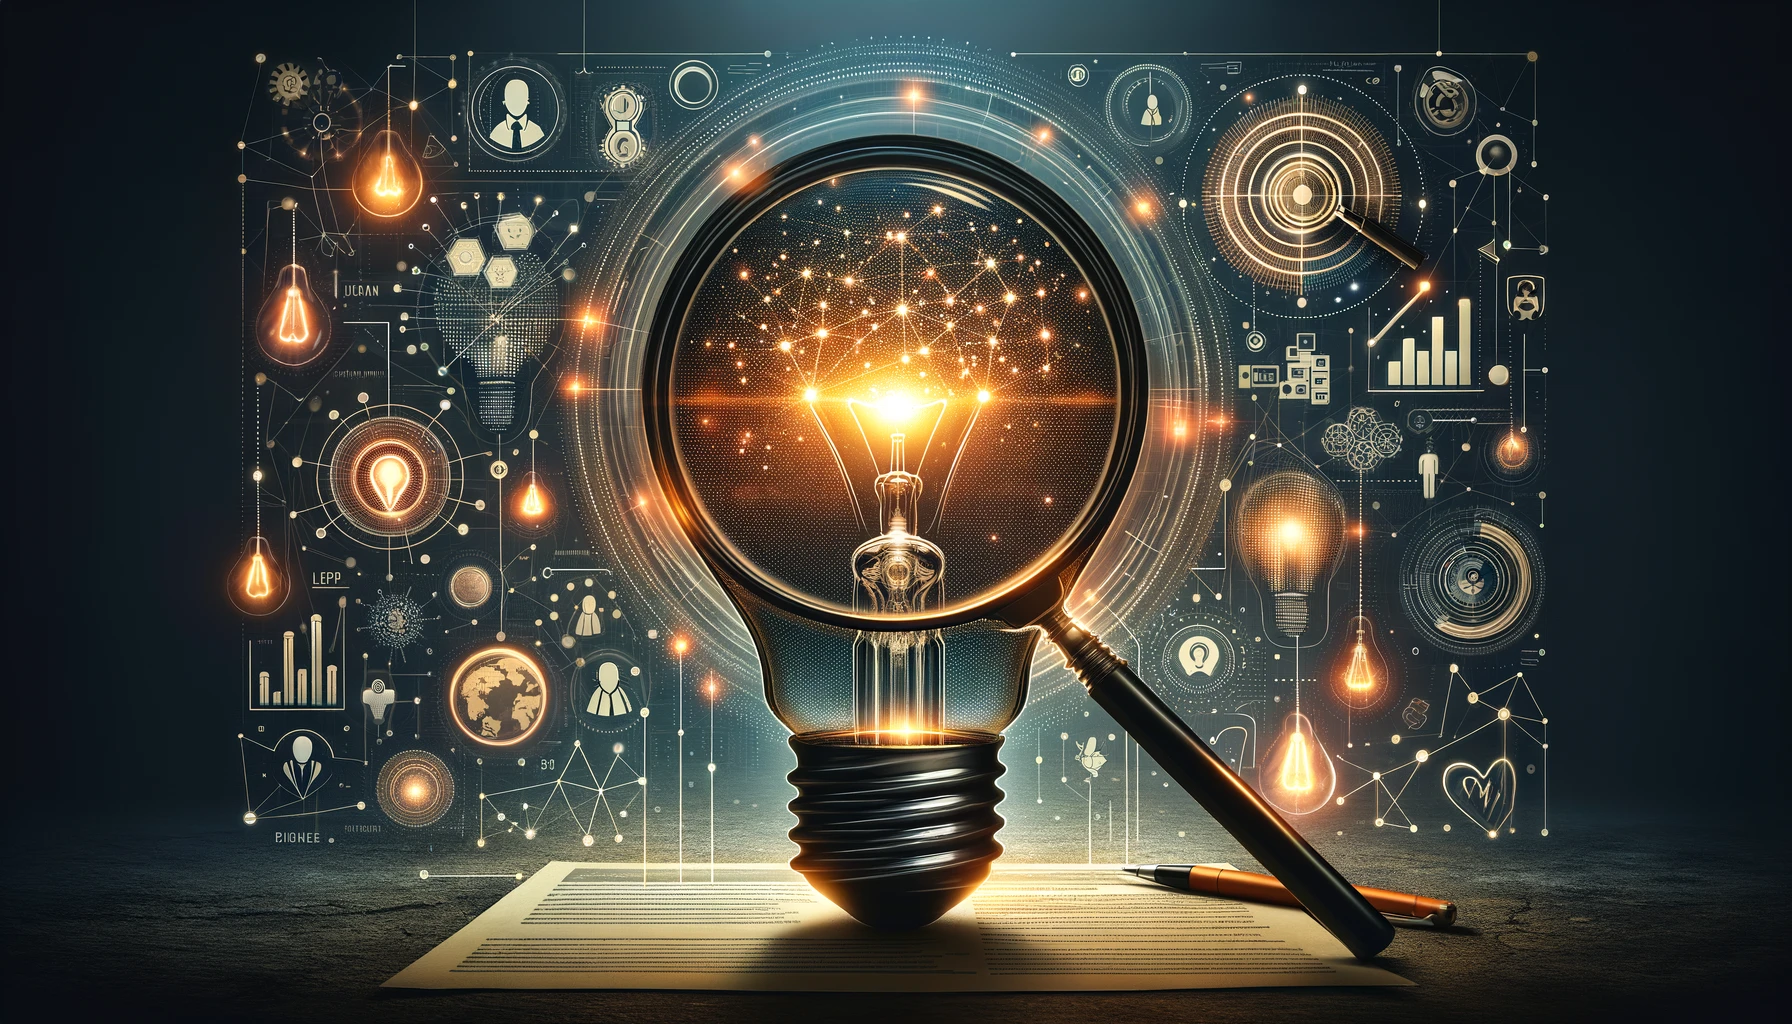 Image featuring a glowing lightbulb, a magnifying glass, and abstract data elements, symbolizing creativity and professional success in recruitment.